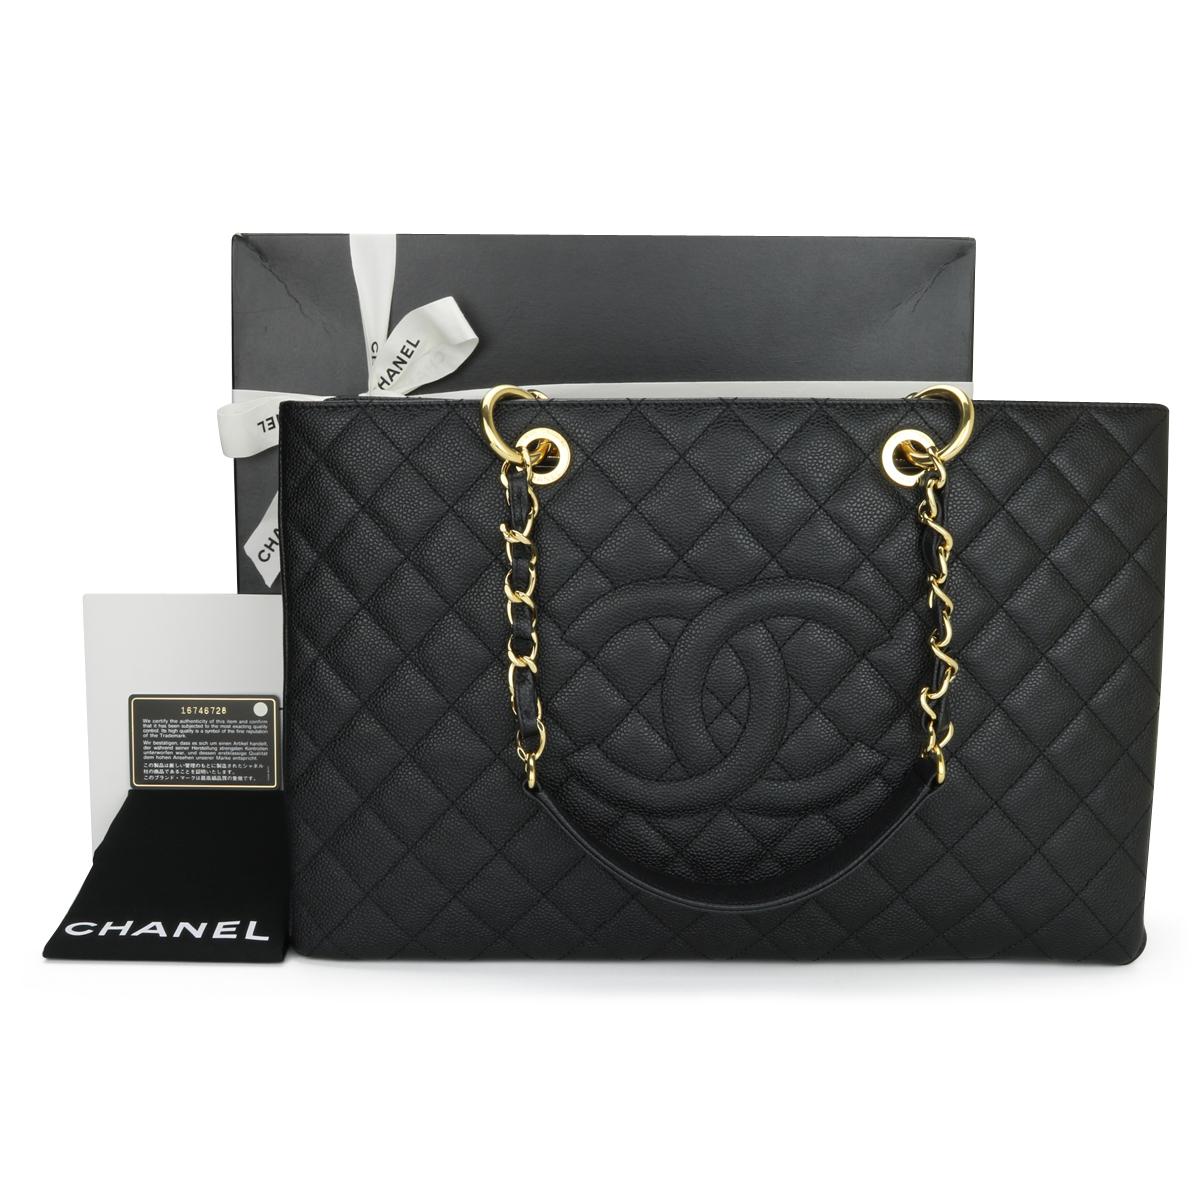 CHANEL Grand Shopping Tote (GST) XL Black Caviar with Gold Hardware 2012.

This bag is in pristine – as new condition, the bag still holds its original shape, and the hardware is still shiny.

As Chanel has discontinued the Grand Shopping Tote